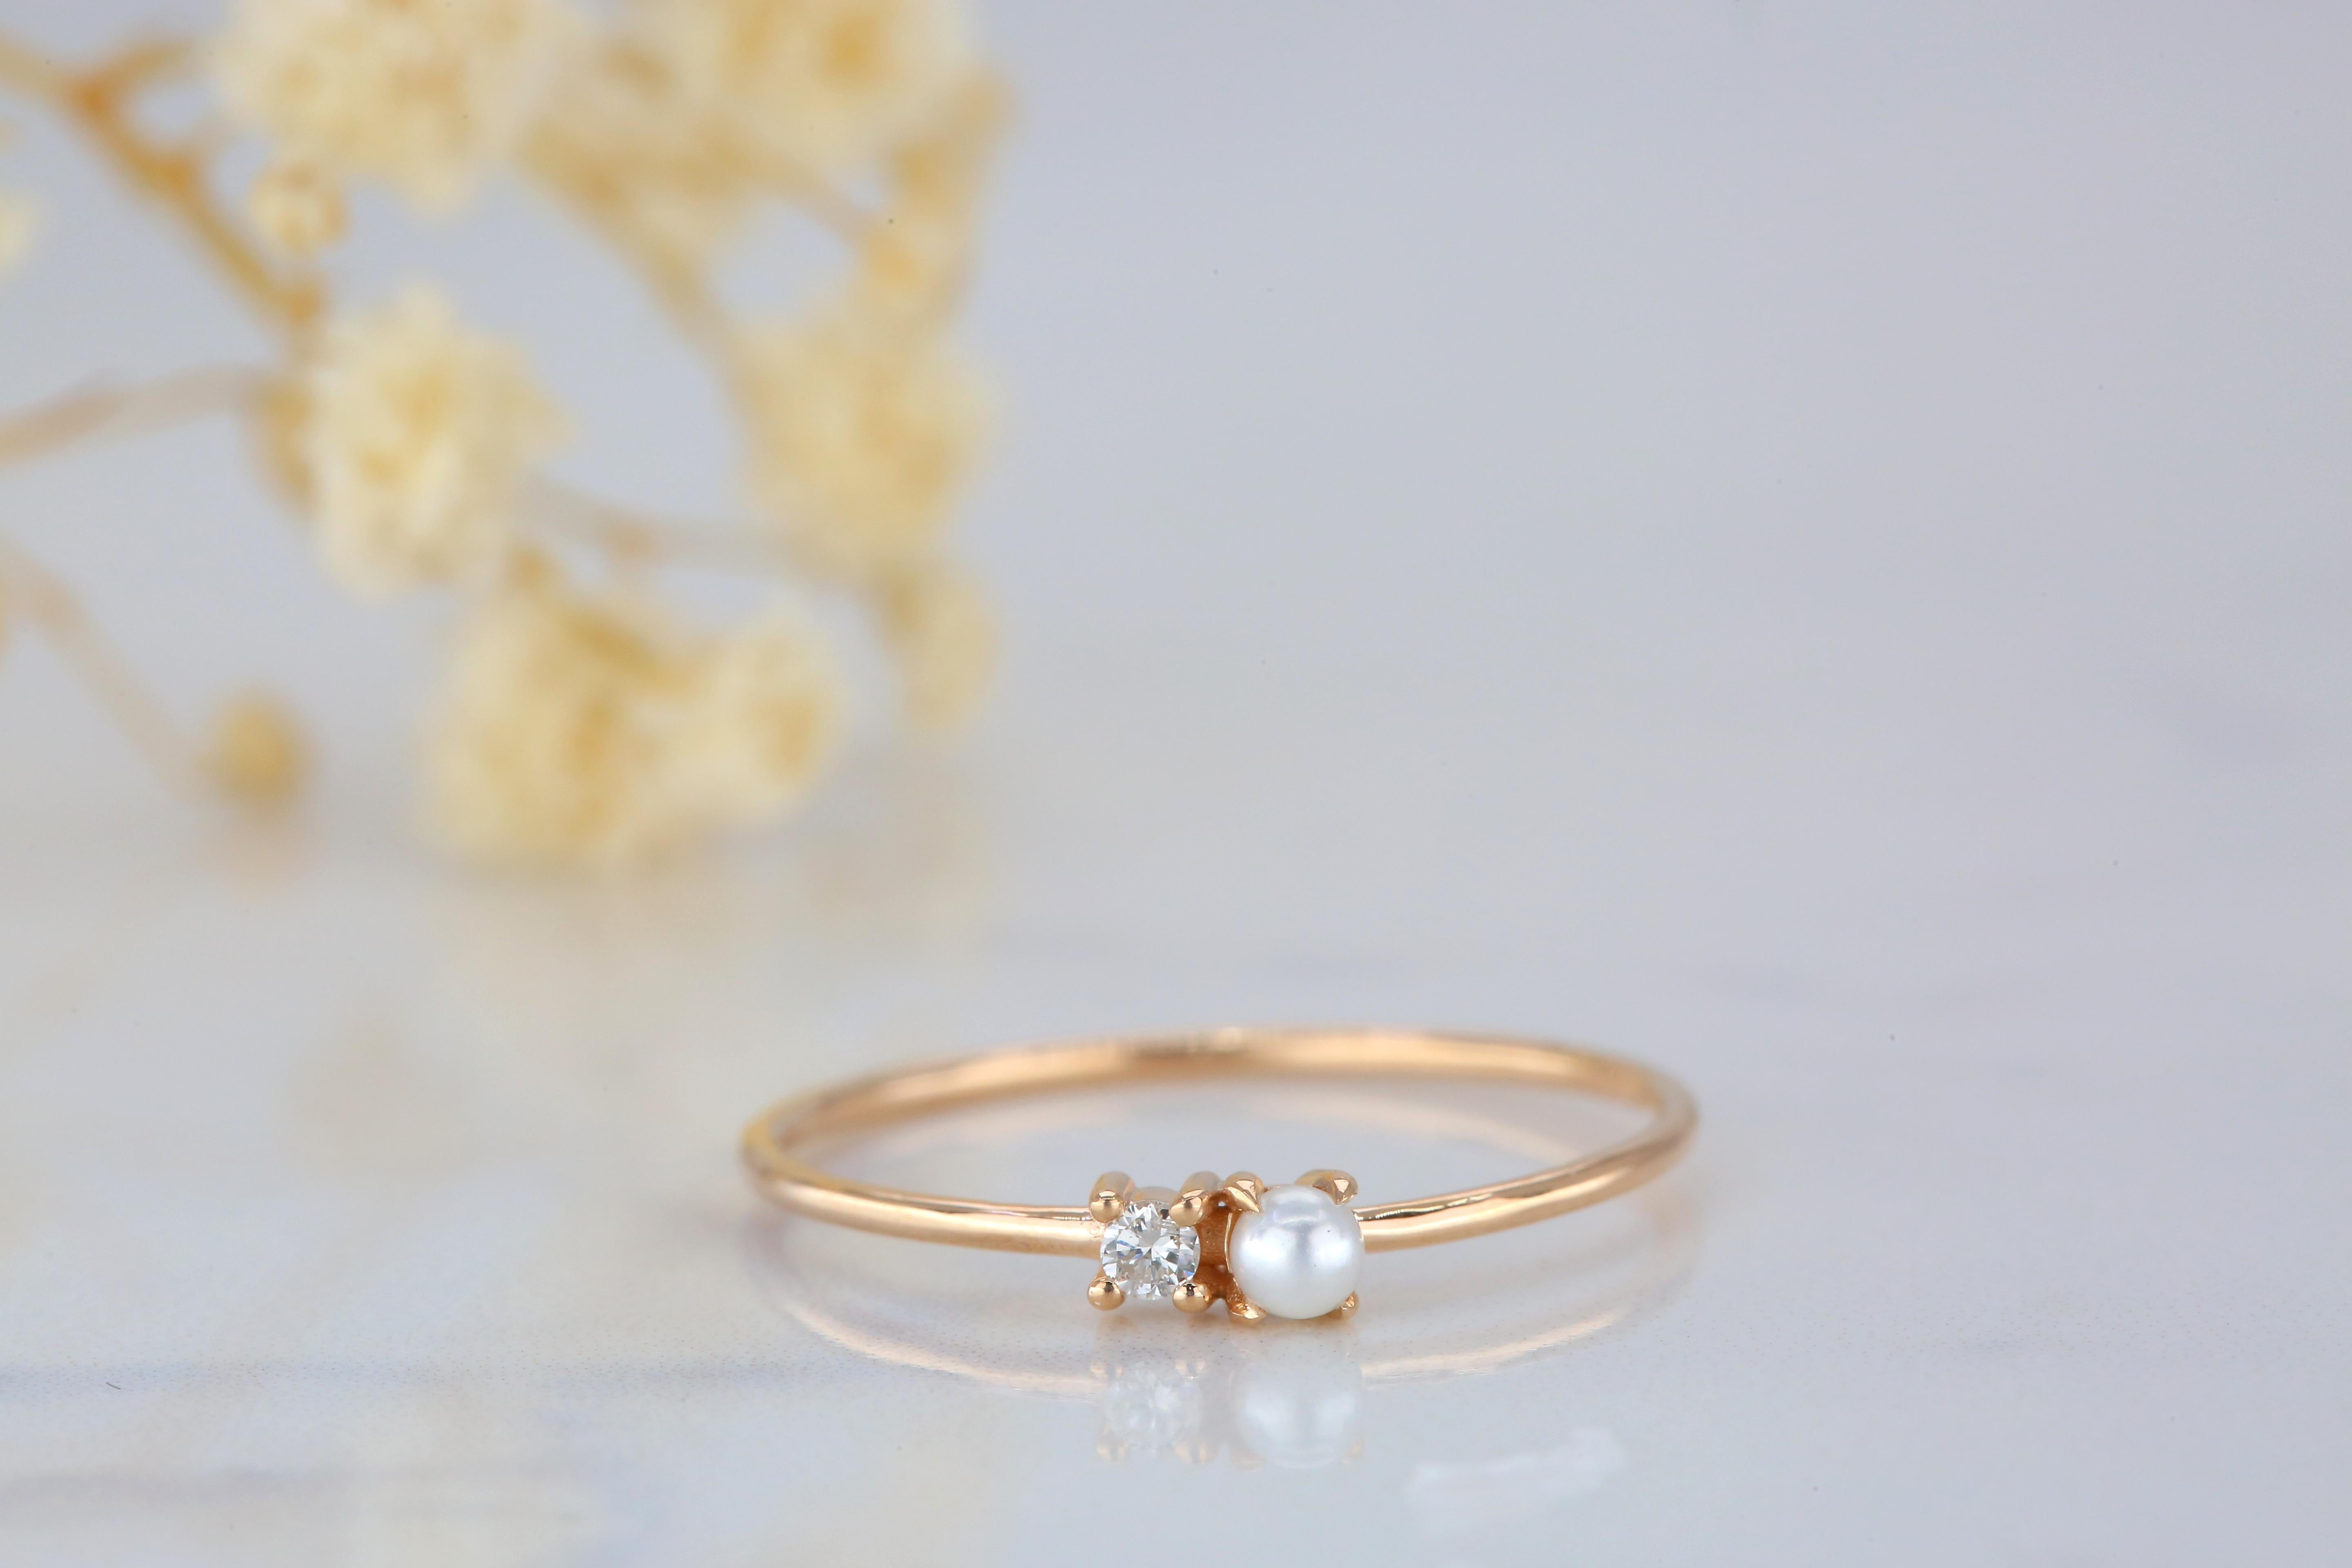 For Sale:  One Pearl and Diamond Ring, 14k Gold Pearl Ring, Minimalist Style Ring 3